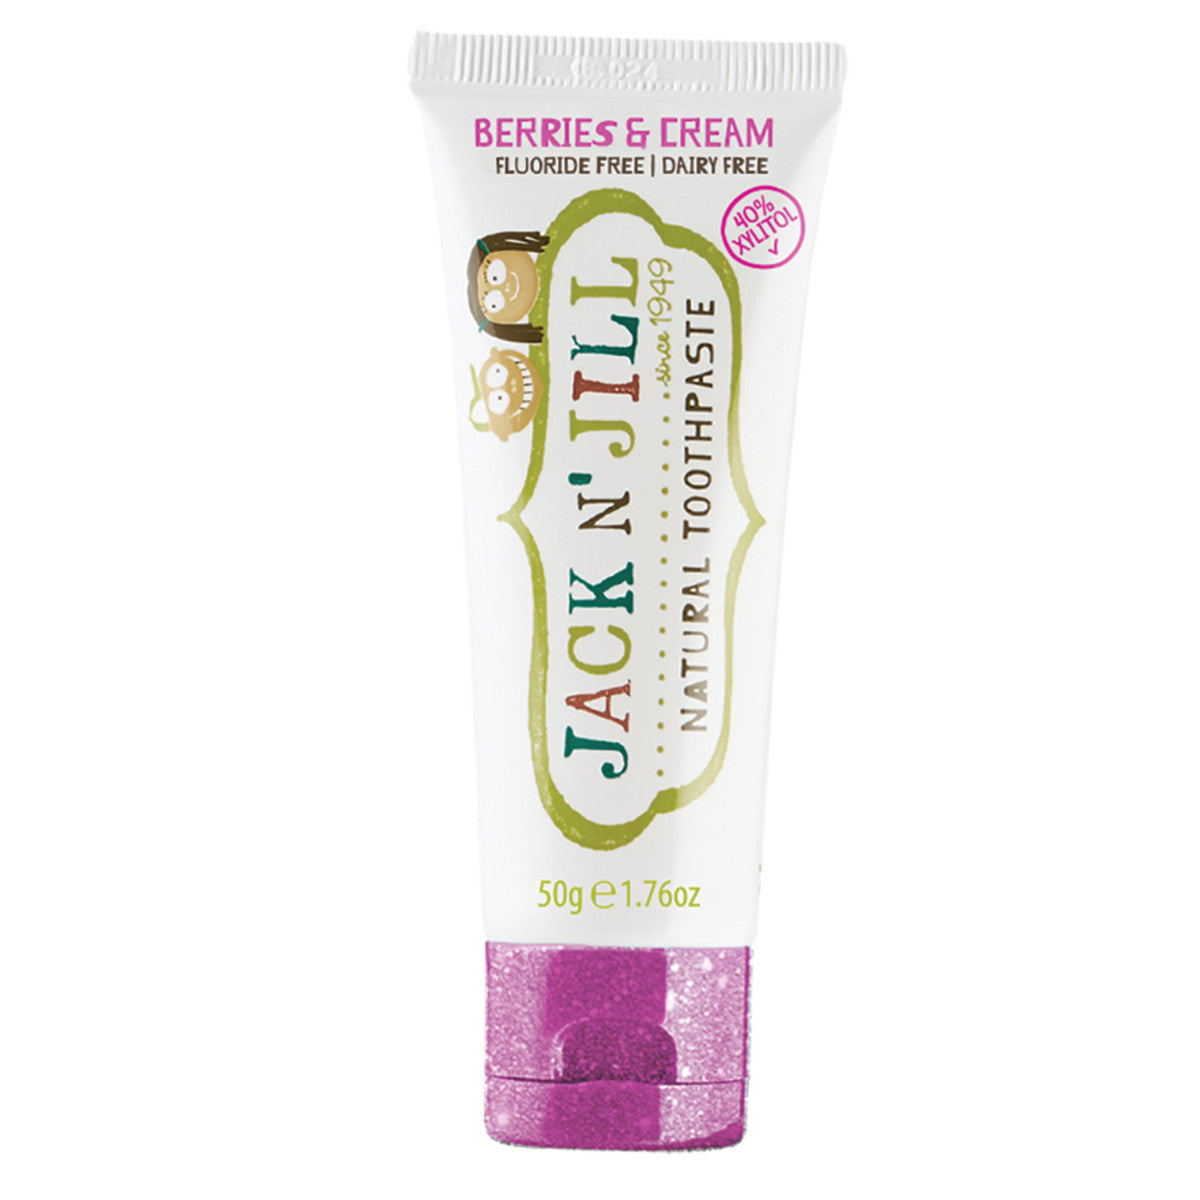 Jack n' Jill Toothpaste (Fluoride Free) Berries & Cream 50g-The Living Co.